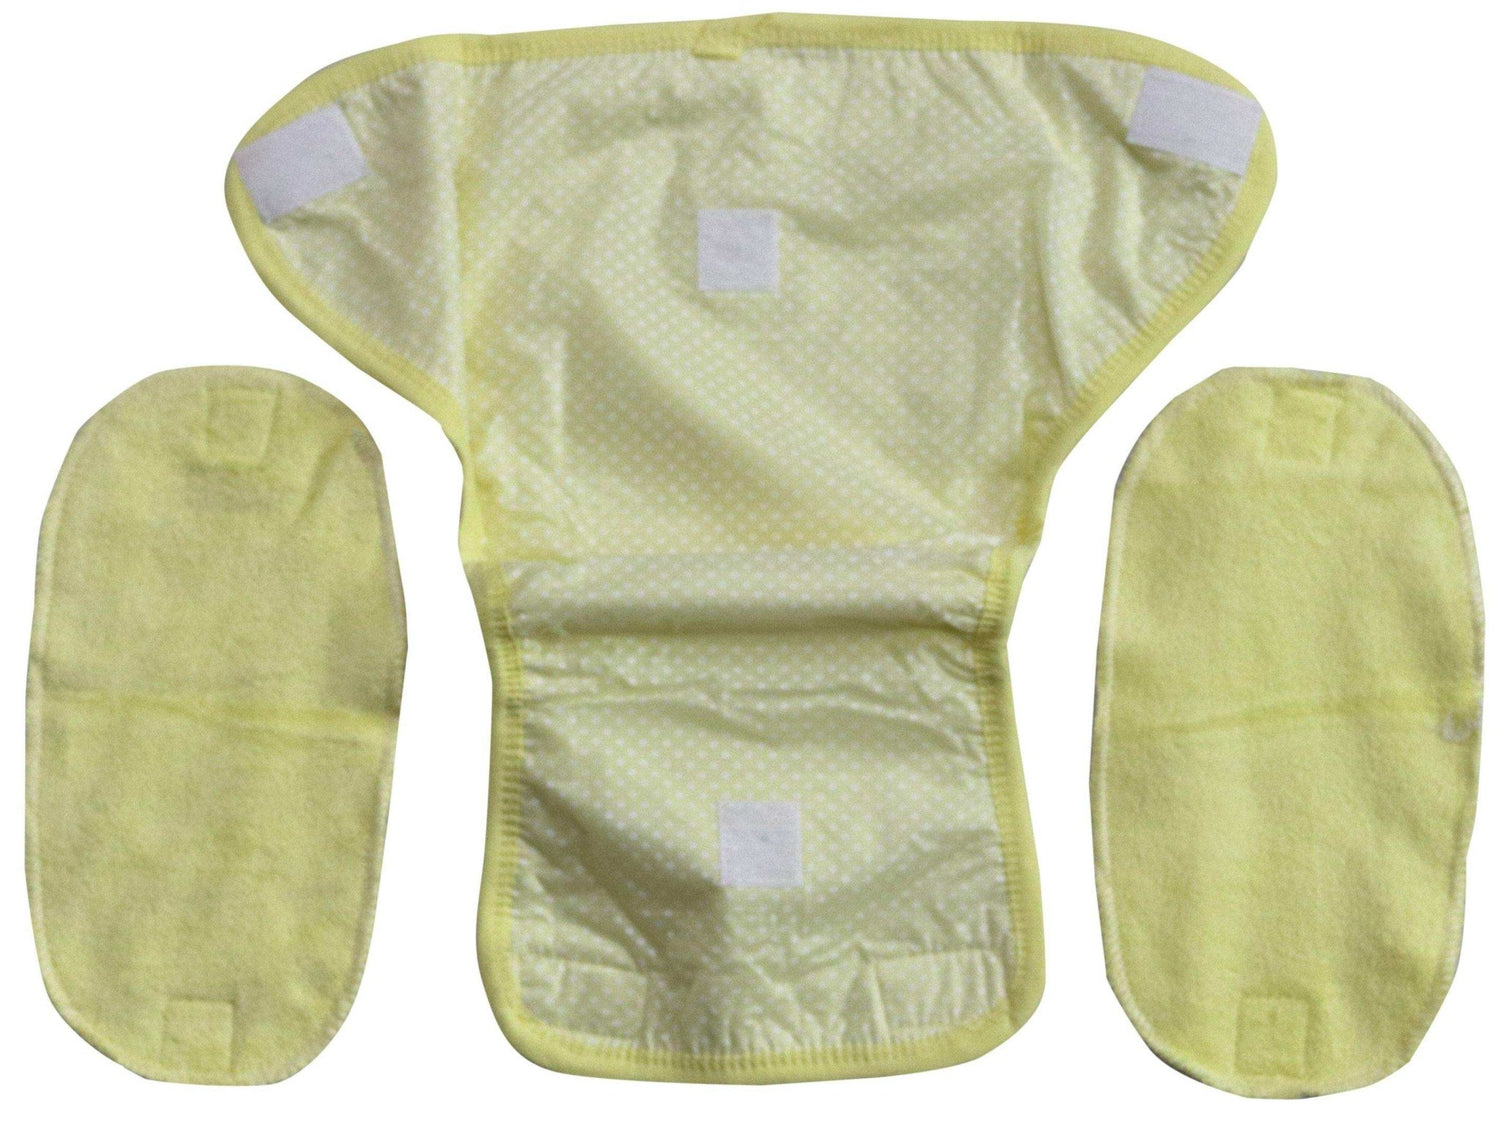 Newborn pure soft cotton reusable padded diapers or nappies pack of 2 pcs. - FAVISM